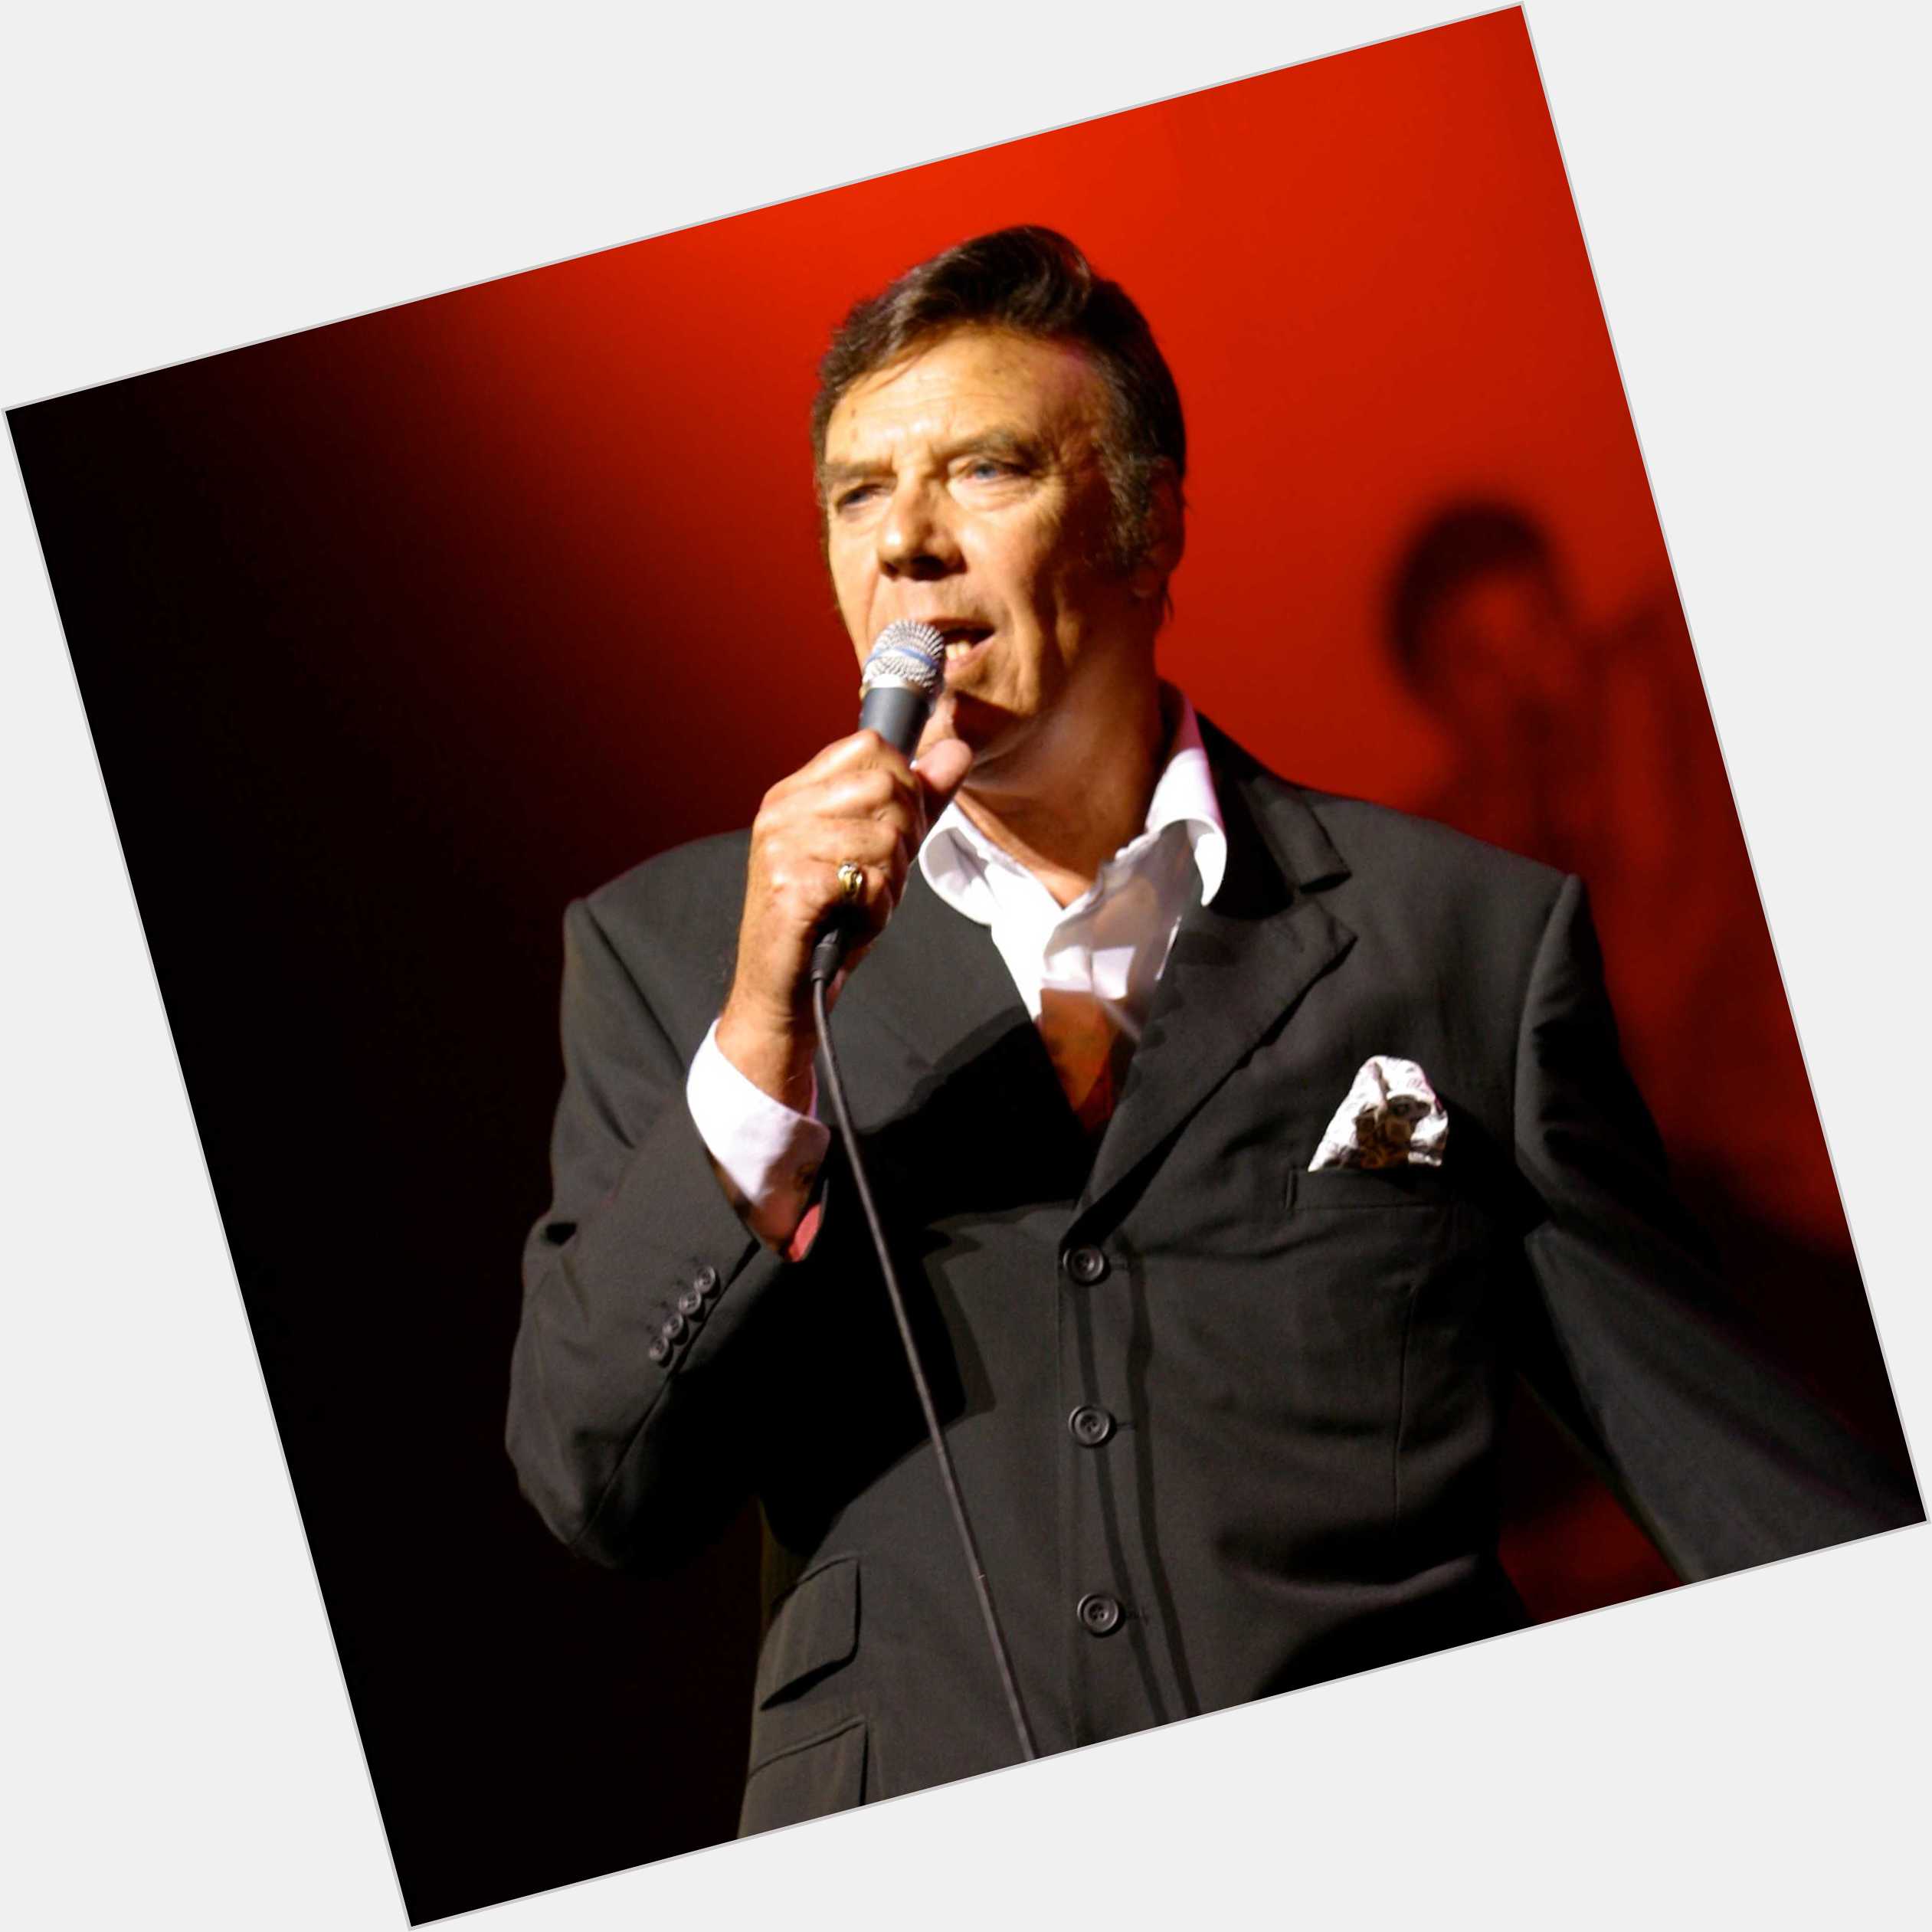 Http://fanpagepress.net/m/M/Marty Wilde New Pic 1